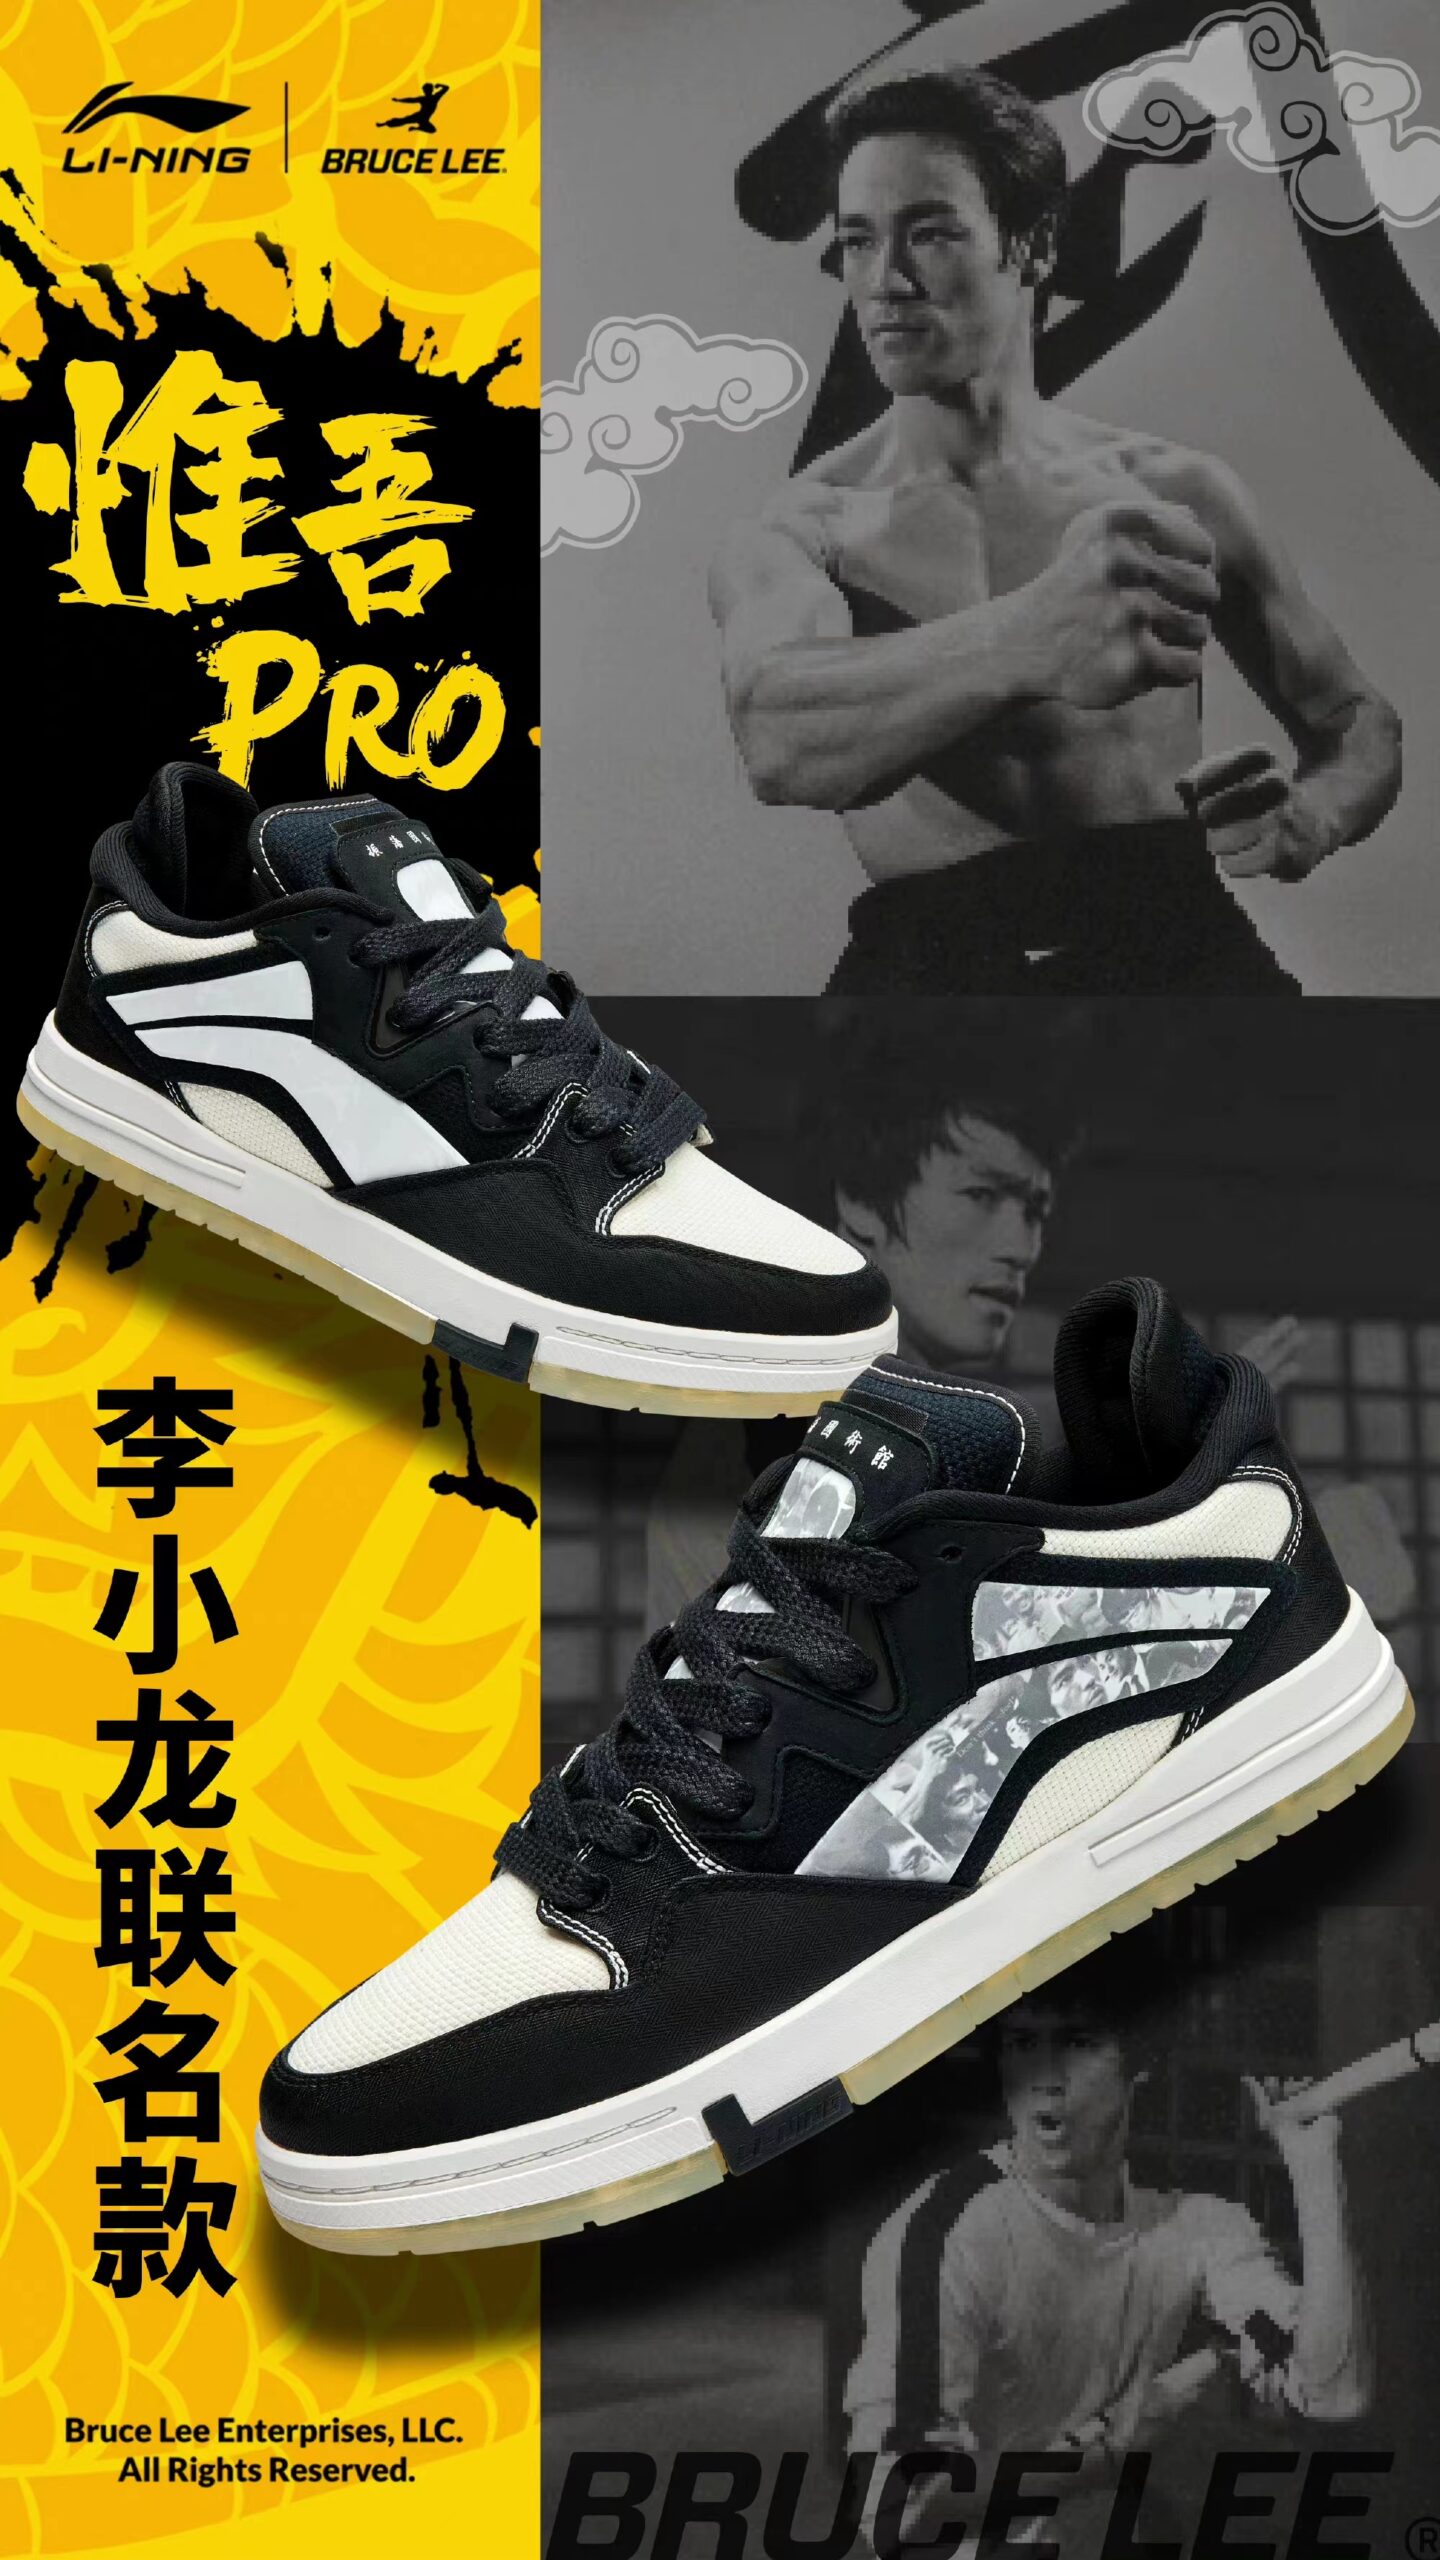 brand collaborations in China: Li Ning and Bruce Lee co-branded shoes